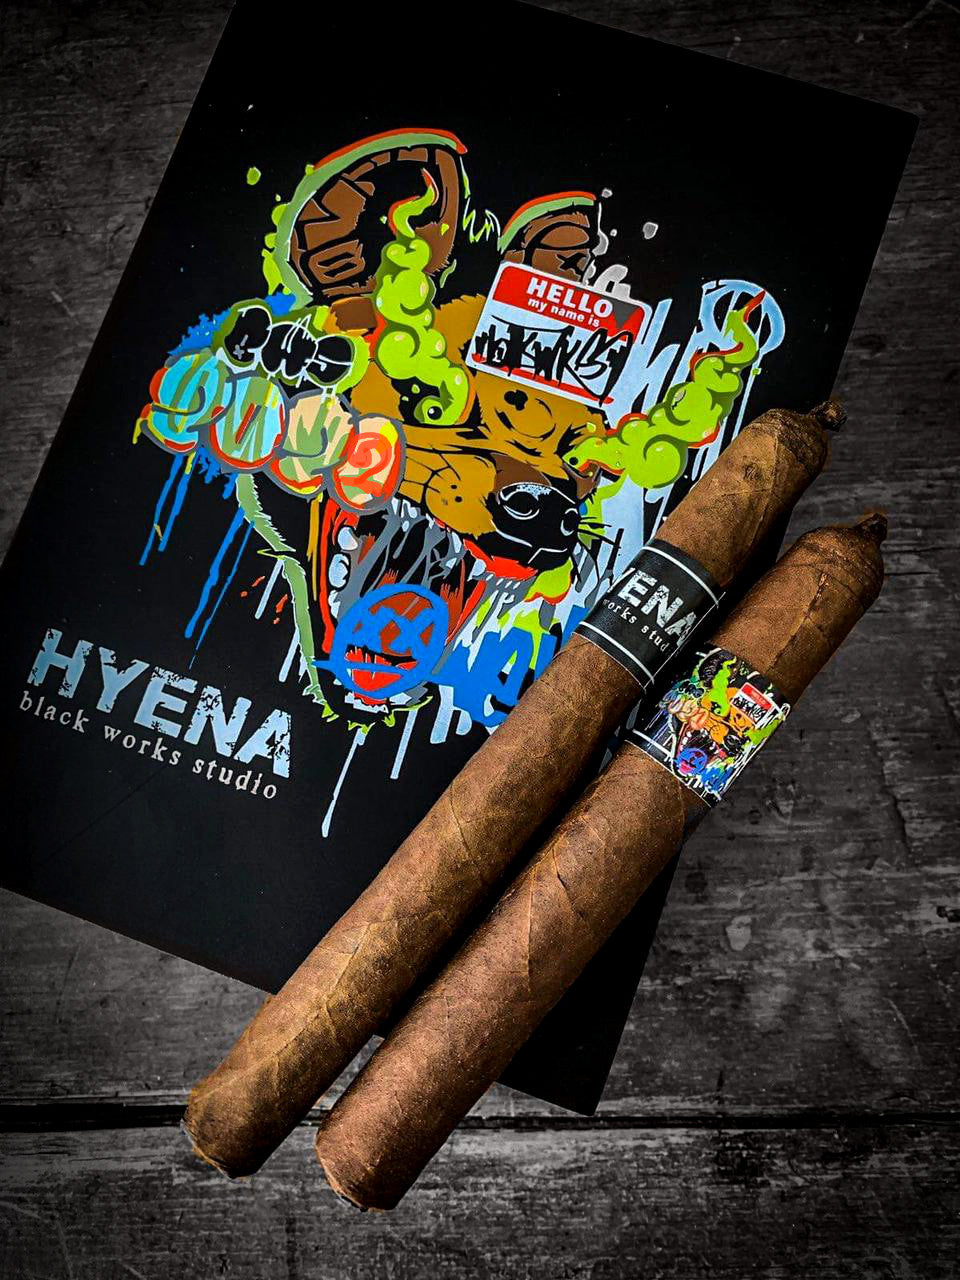 Black Works Studio Announces 2nd Release of Hyena